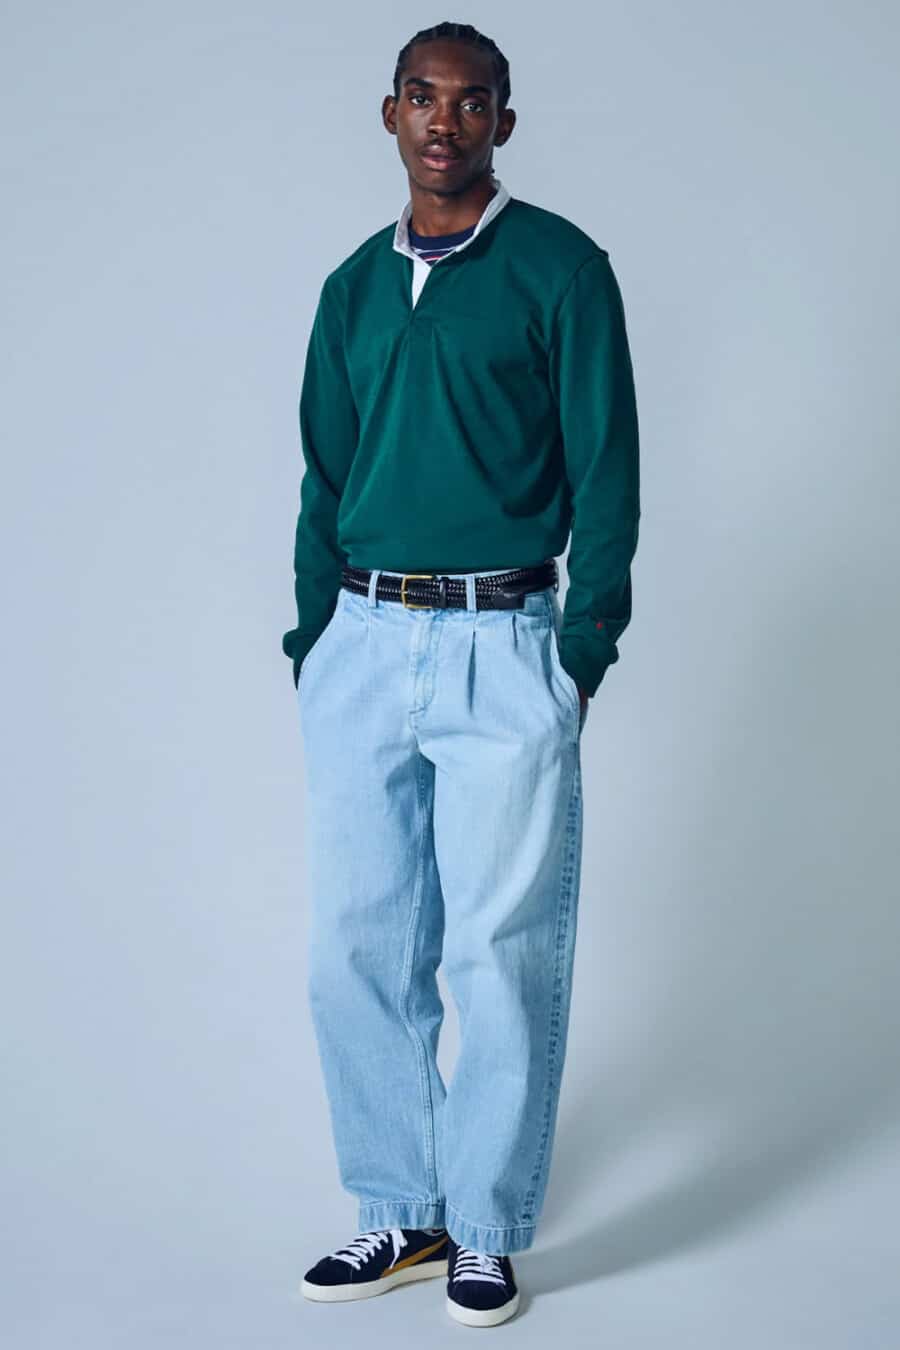 Men's wide light blue pleated jeans, black woven leather belt, marine blue rugby shirt and navy suede sneakers outfit